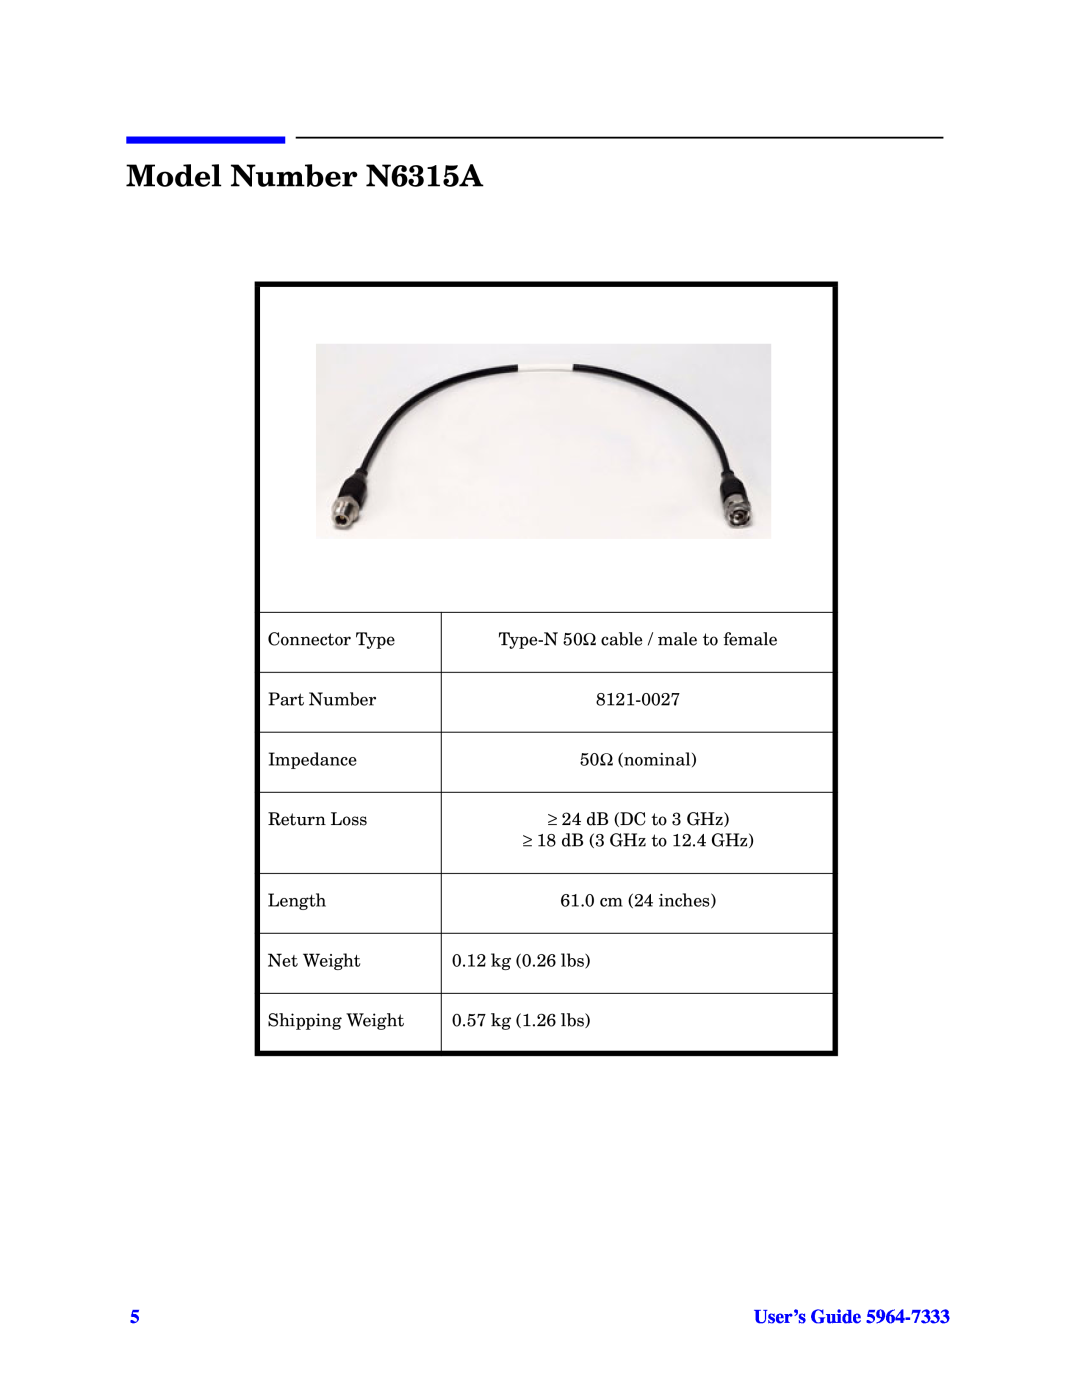 Agilent Technologies N6314A manual Model Number N6315A, User’s Guide 